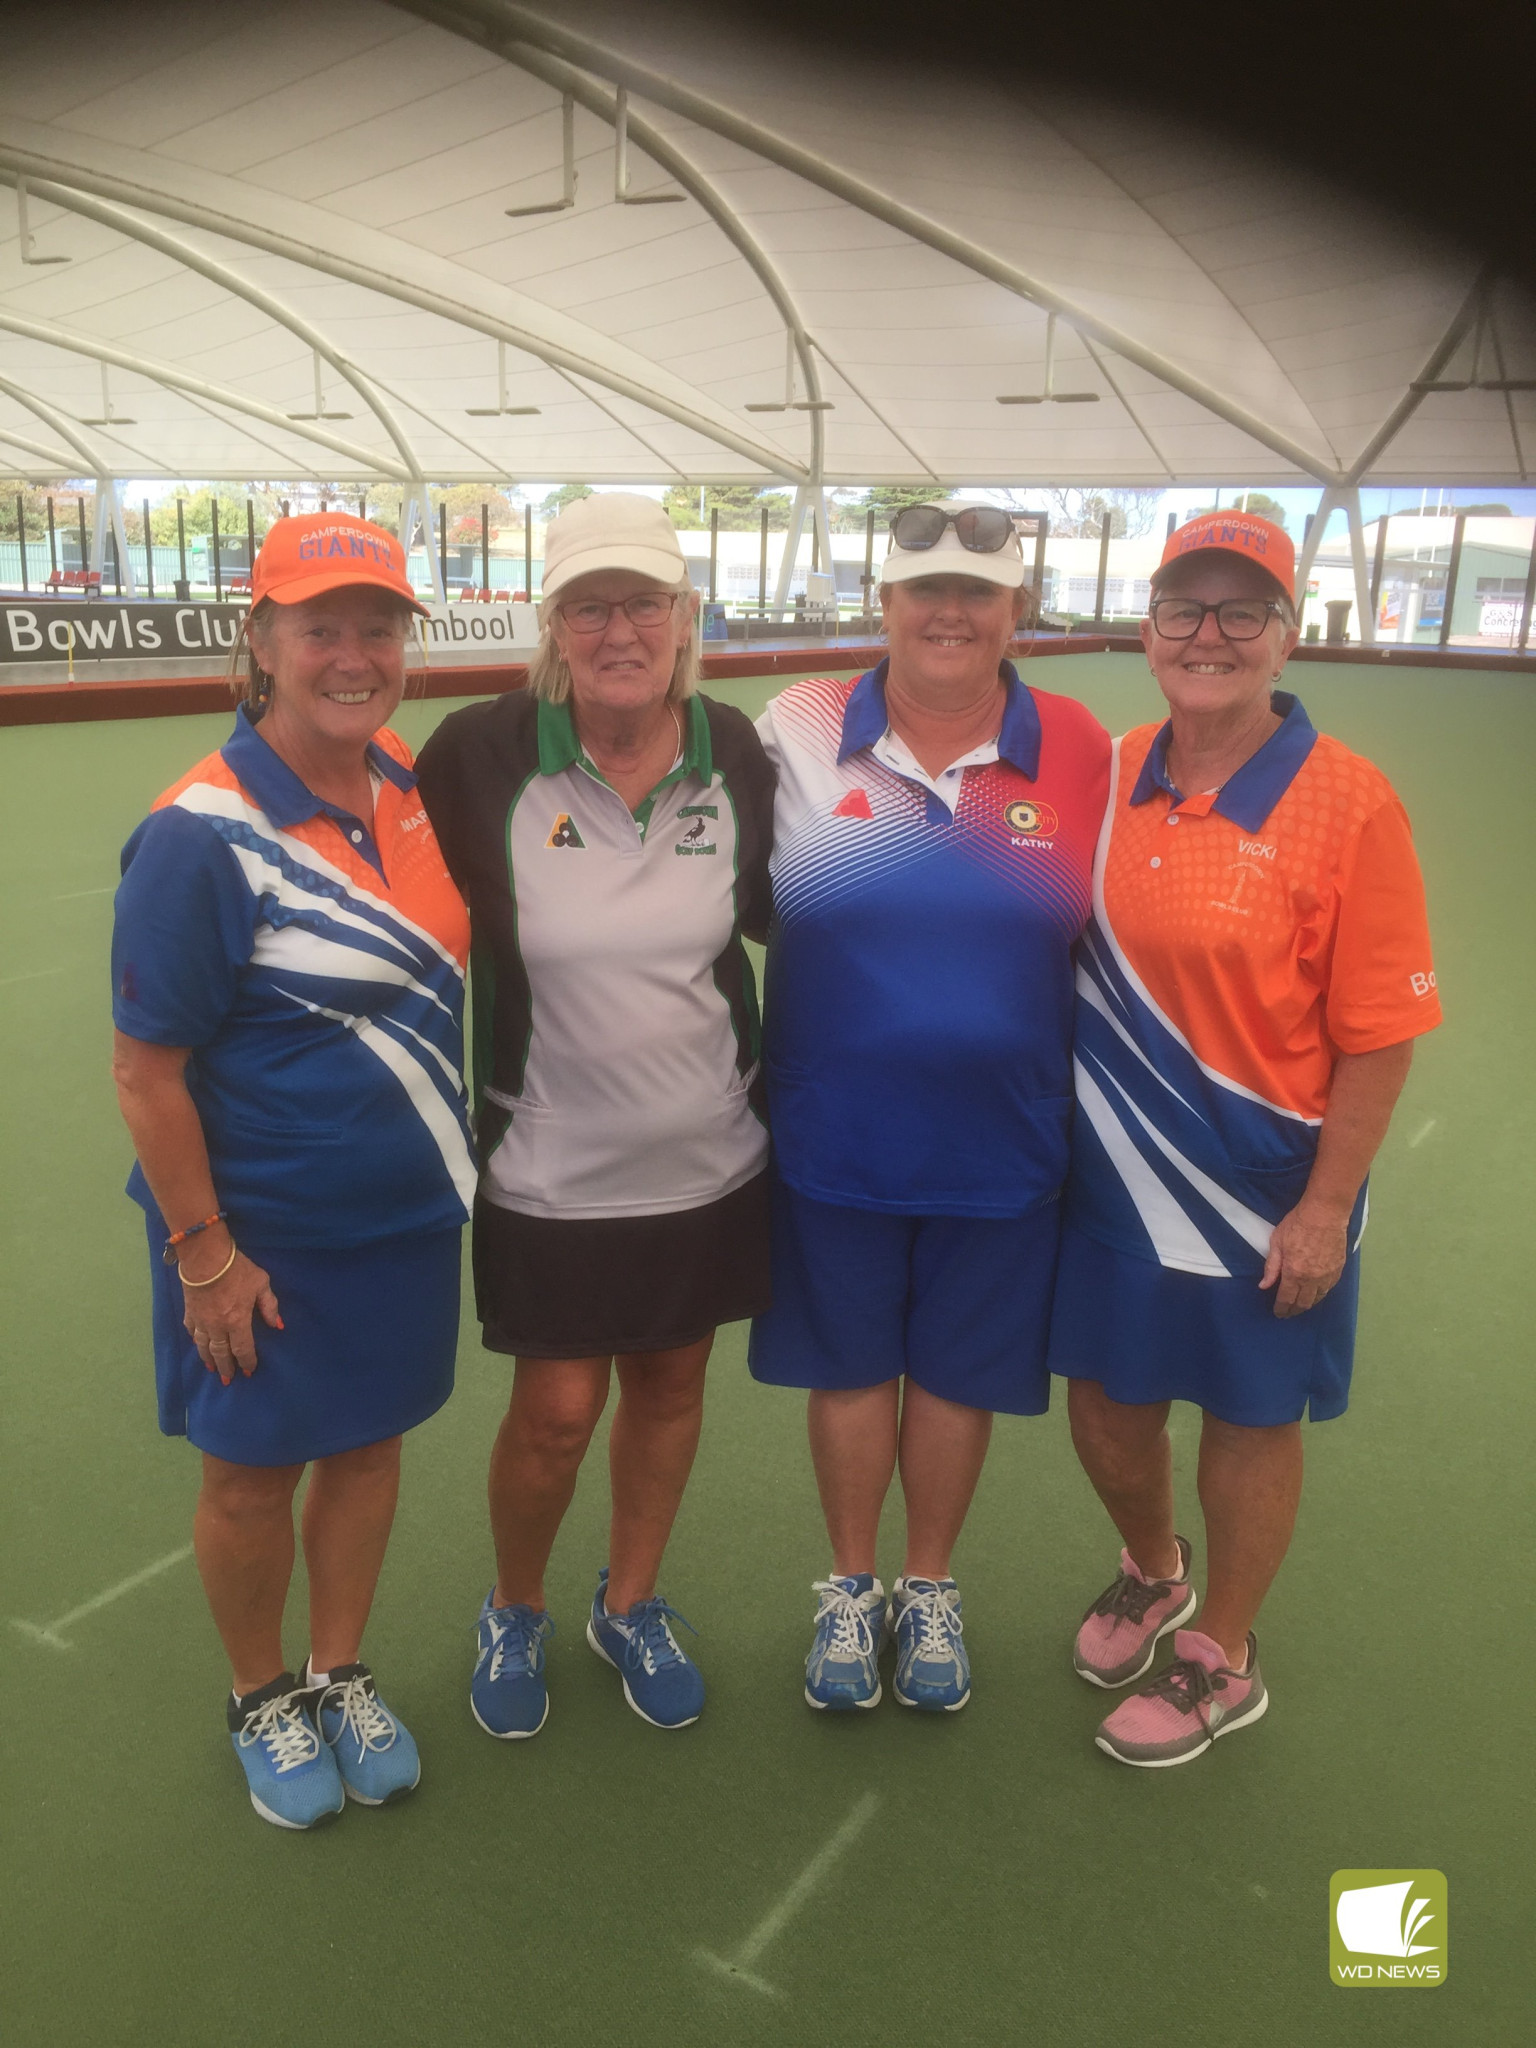 Camperdown Giants Maria Van Someren (left) and Vicki Brebner (right) combined with Leanne Fitzgerald and Kathy Leslie to take out the ladies’ 4s.